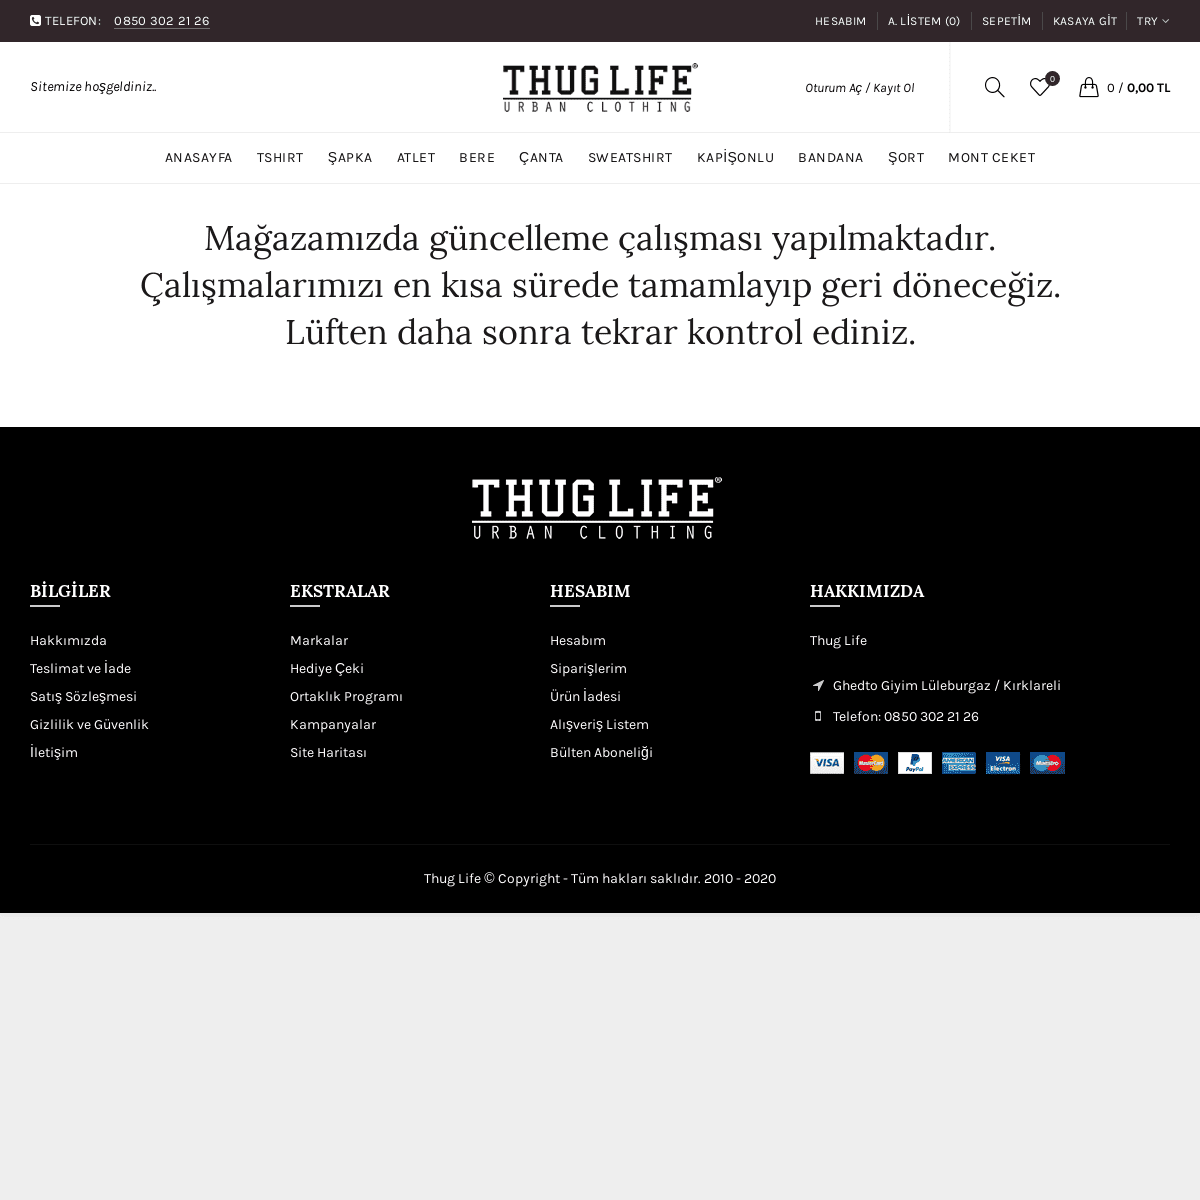 A complete backup of thuglife.com.tr